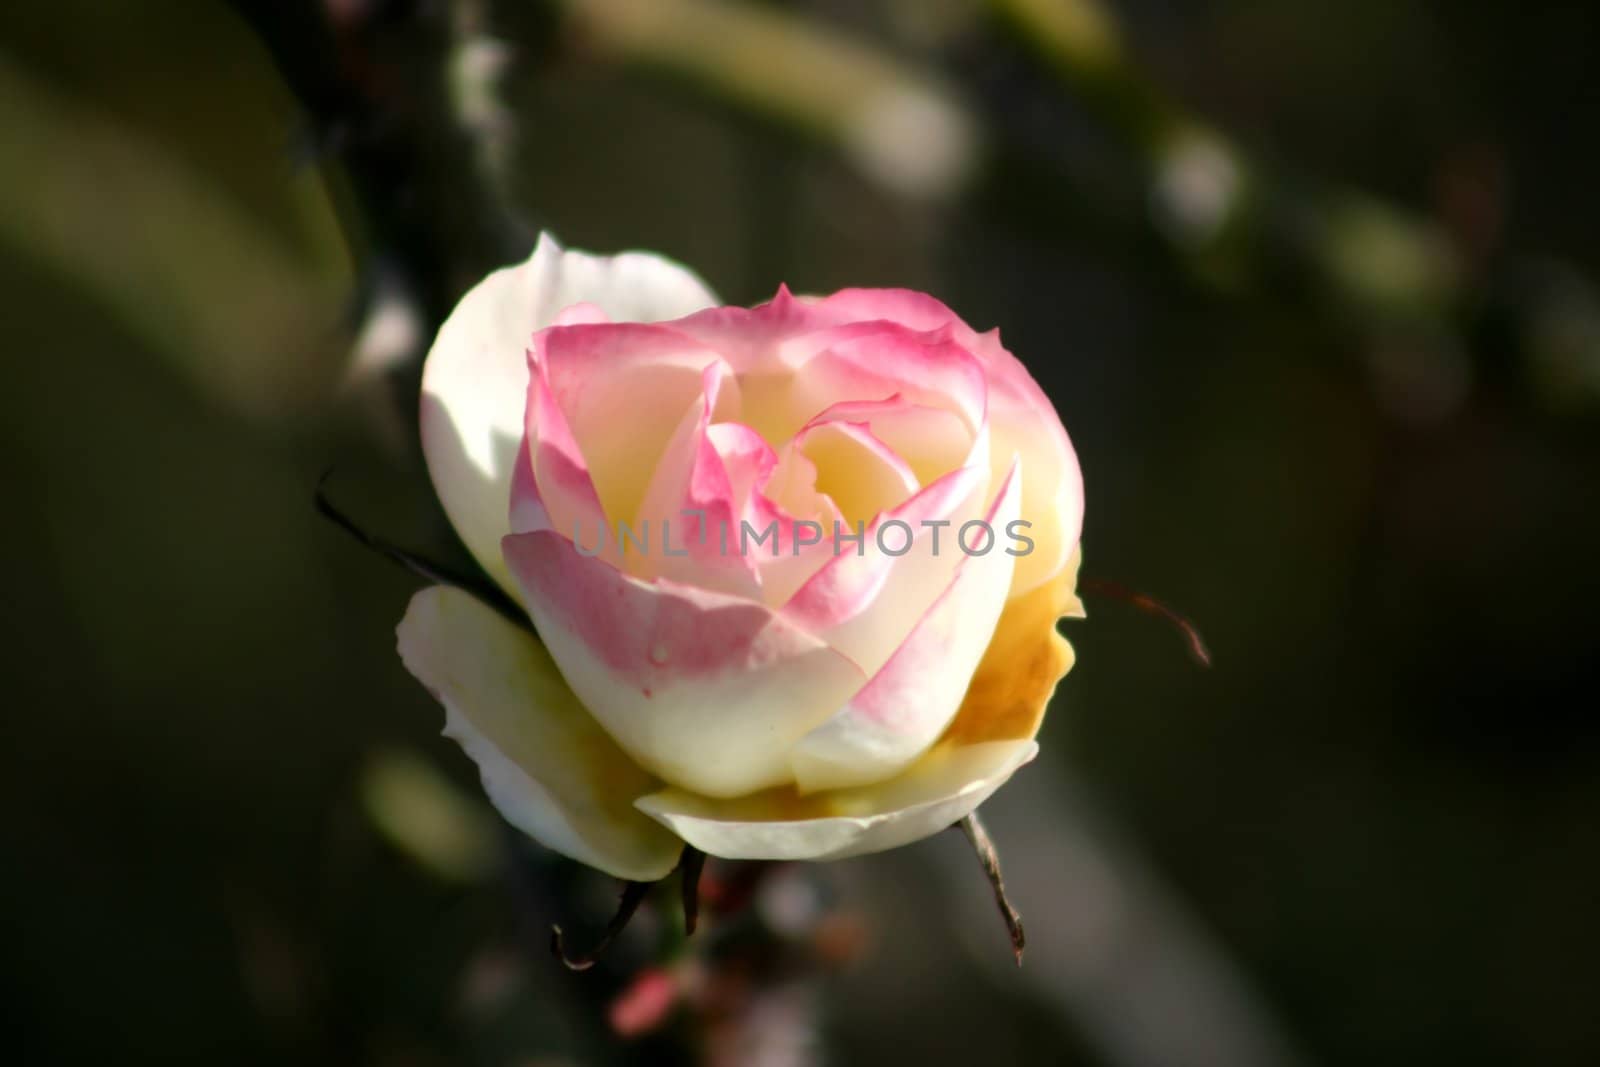 Macro of single rose flower - narrow depth of field and room left for text.